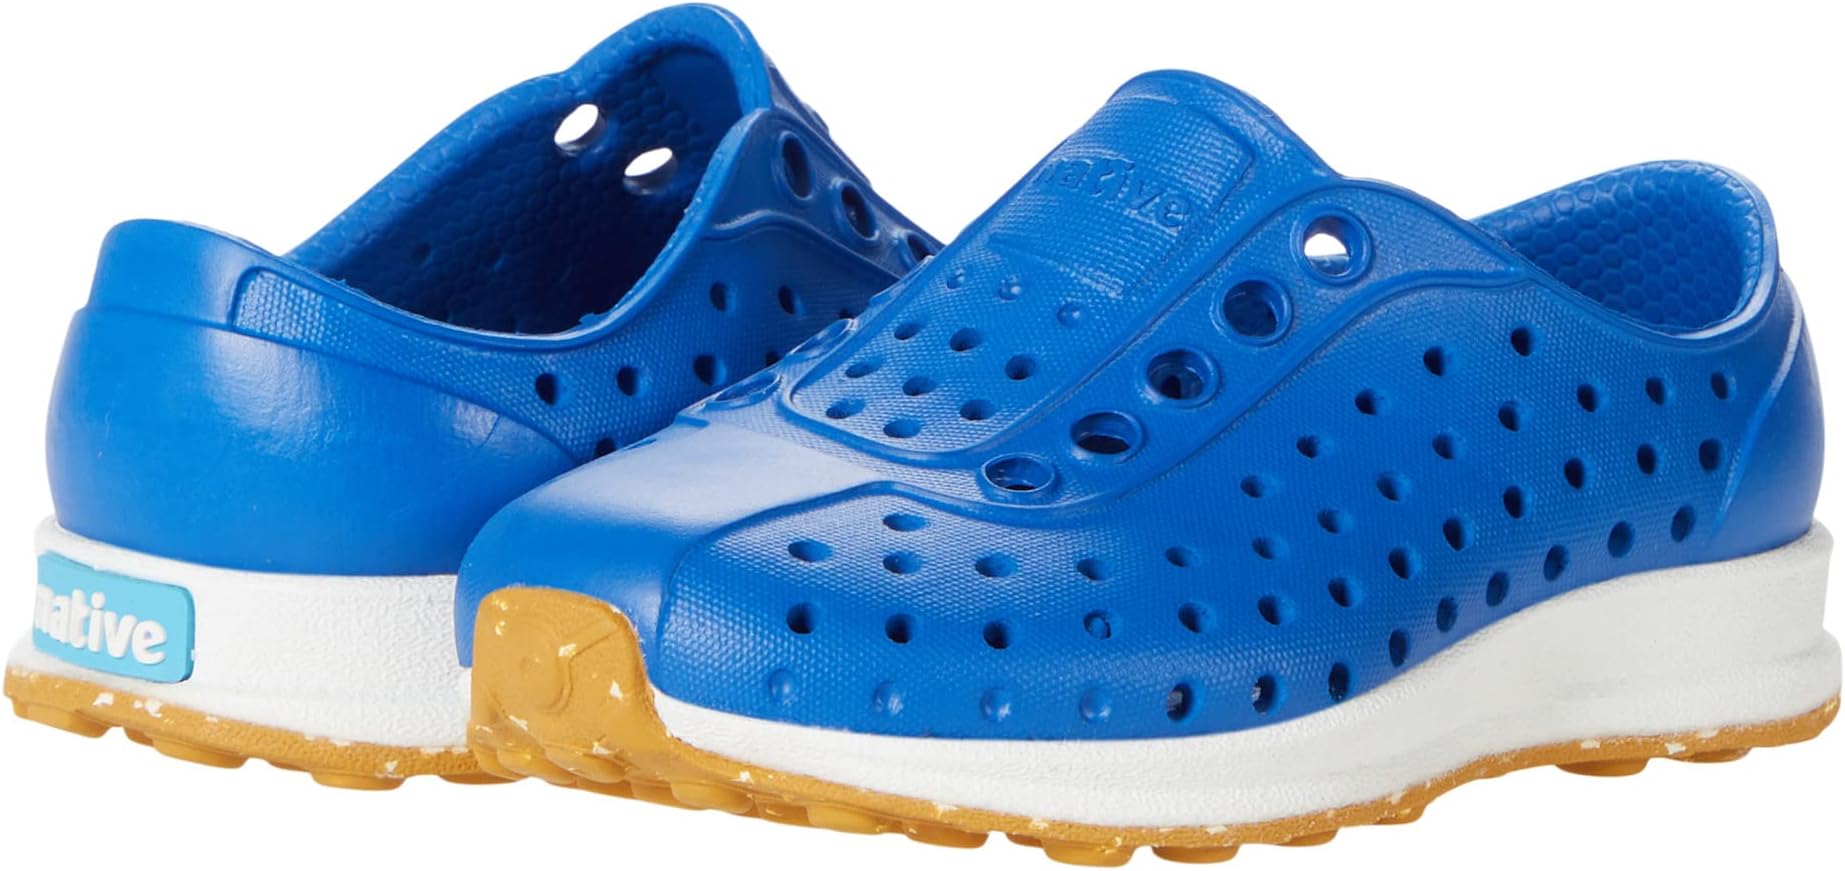 Кроссовки Robbie Native Shoes Kids, цвет Victoria Blue/Shell White/Mash Speckle Rubber